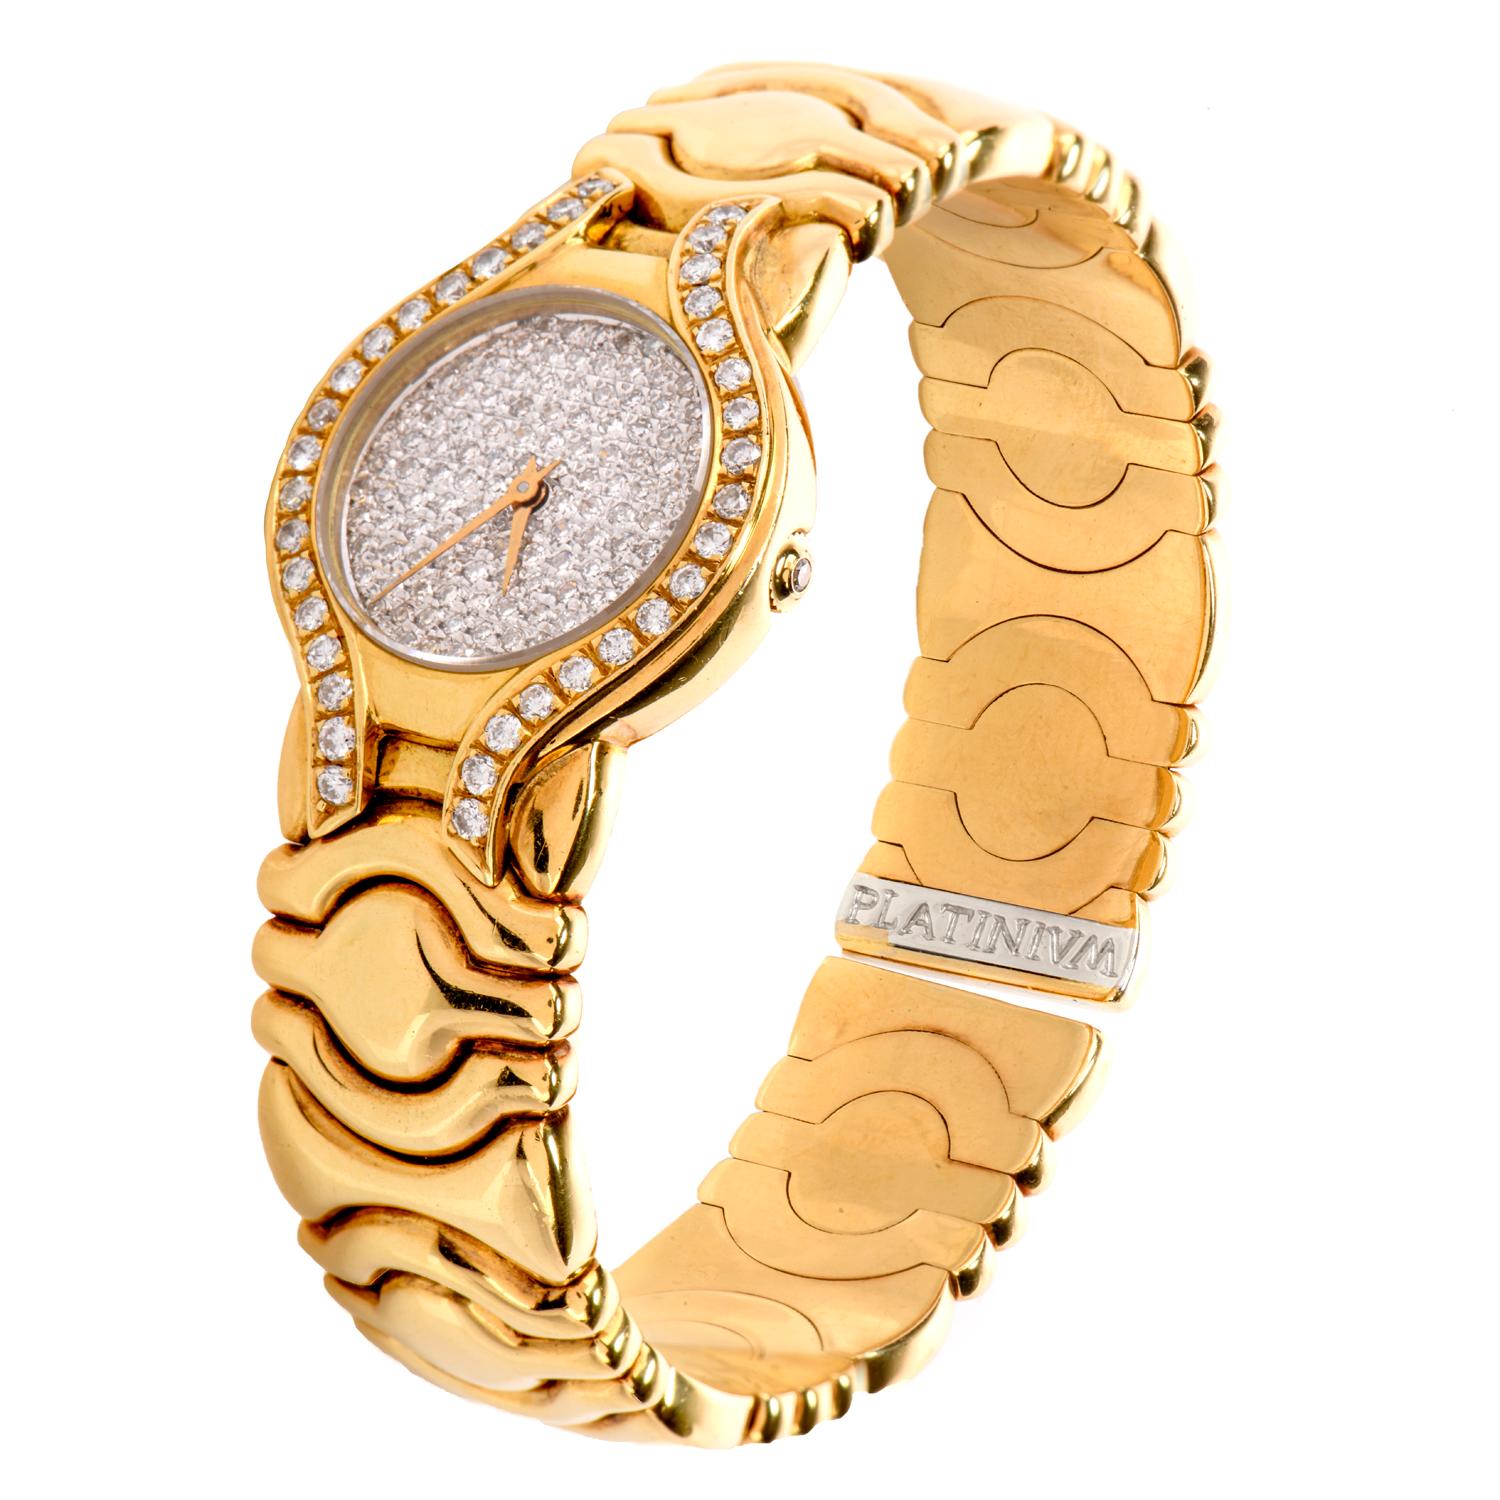 Not just a watch, this piece is also an incredibly stylish cuff bracelet.

Featuring an all Diamond, pave set dial and bezel, this 

quartz battery movement has gold hands and a scratch

resistant sapphire crystal. 

Measuring appx. 24mm in diameter